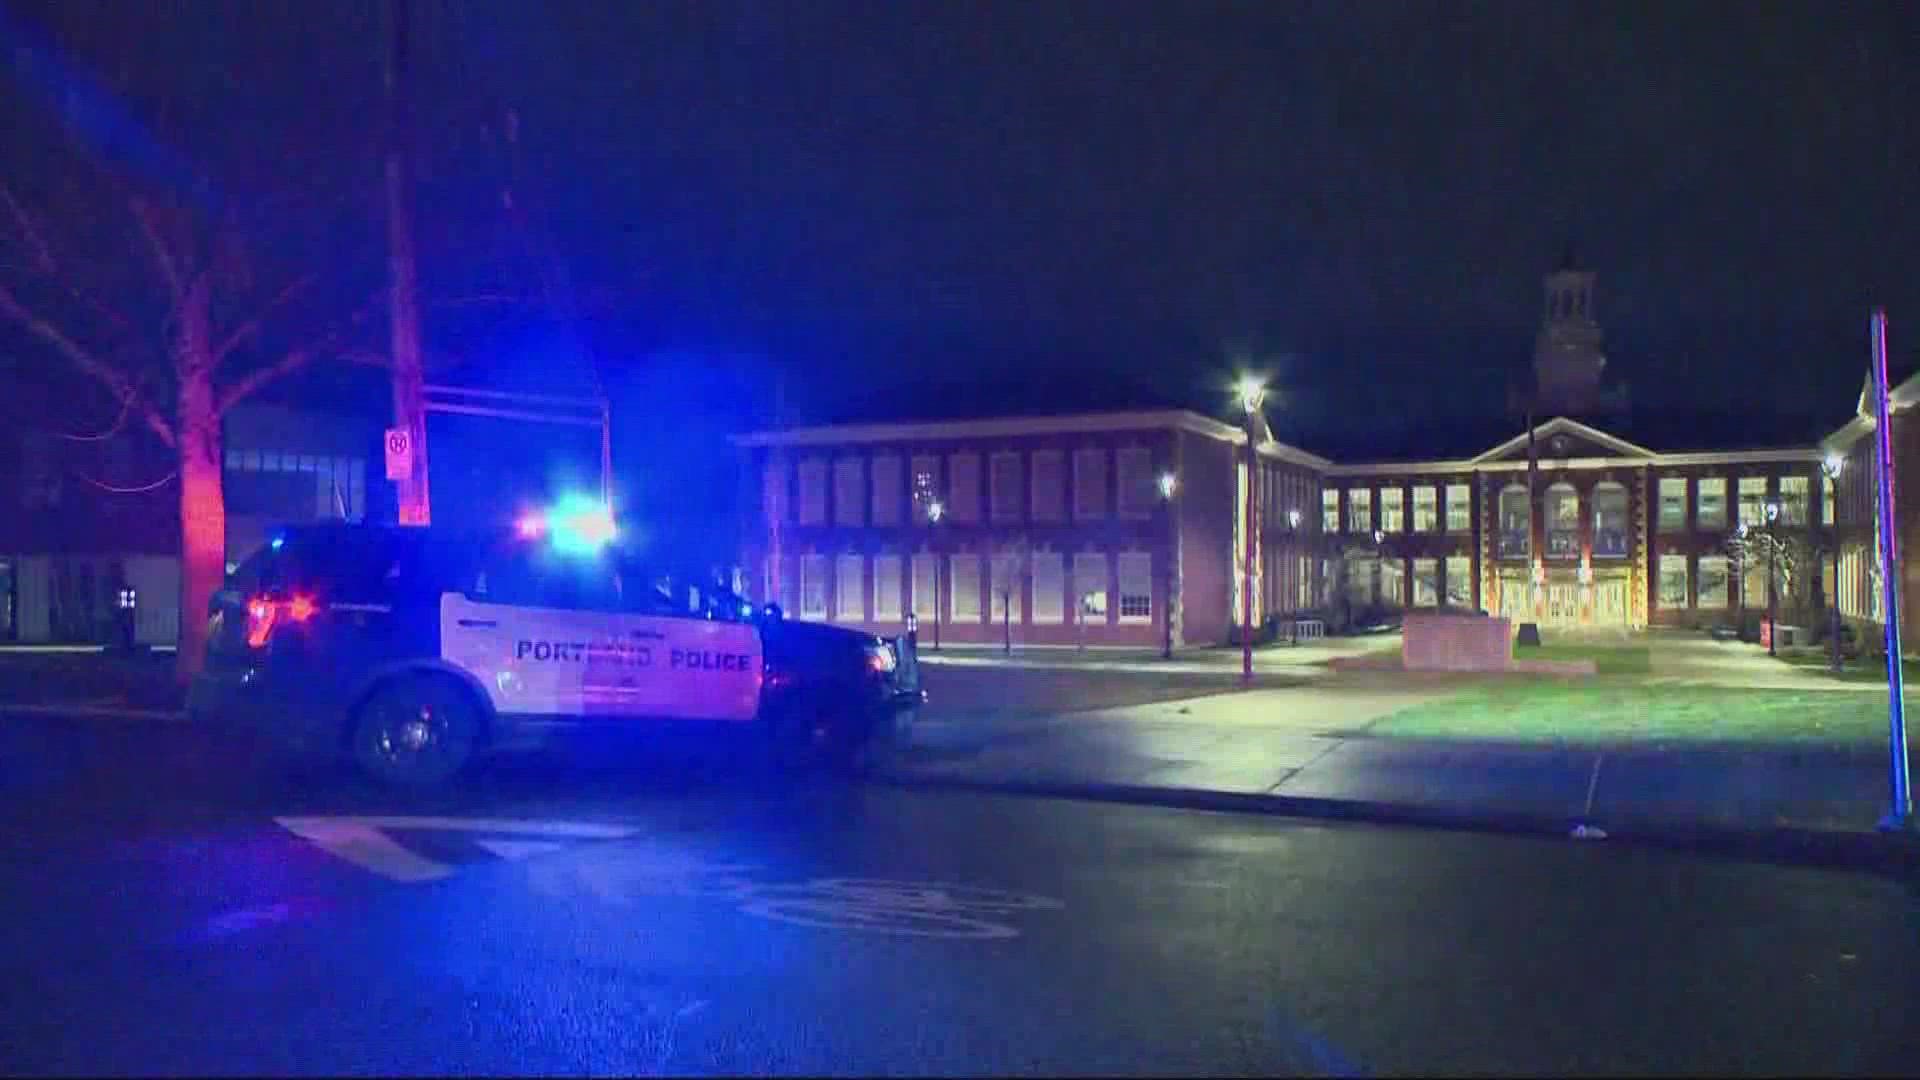 Portland police chief said he'll add extra patrols in the neighborhood around Franklin High. The PPS superintendent said he wants more patrols around all schools.